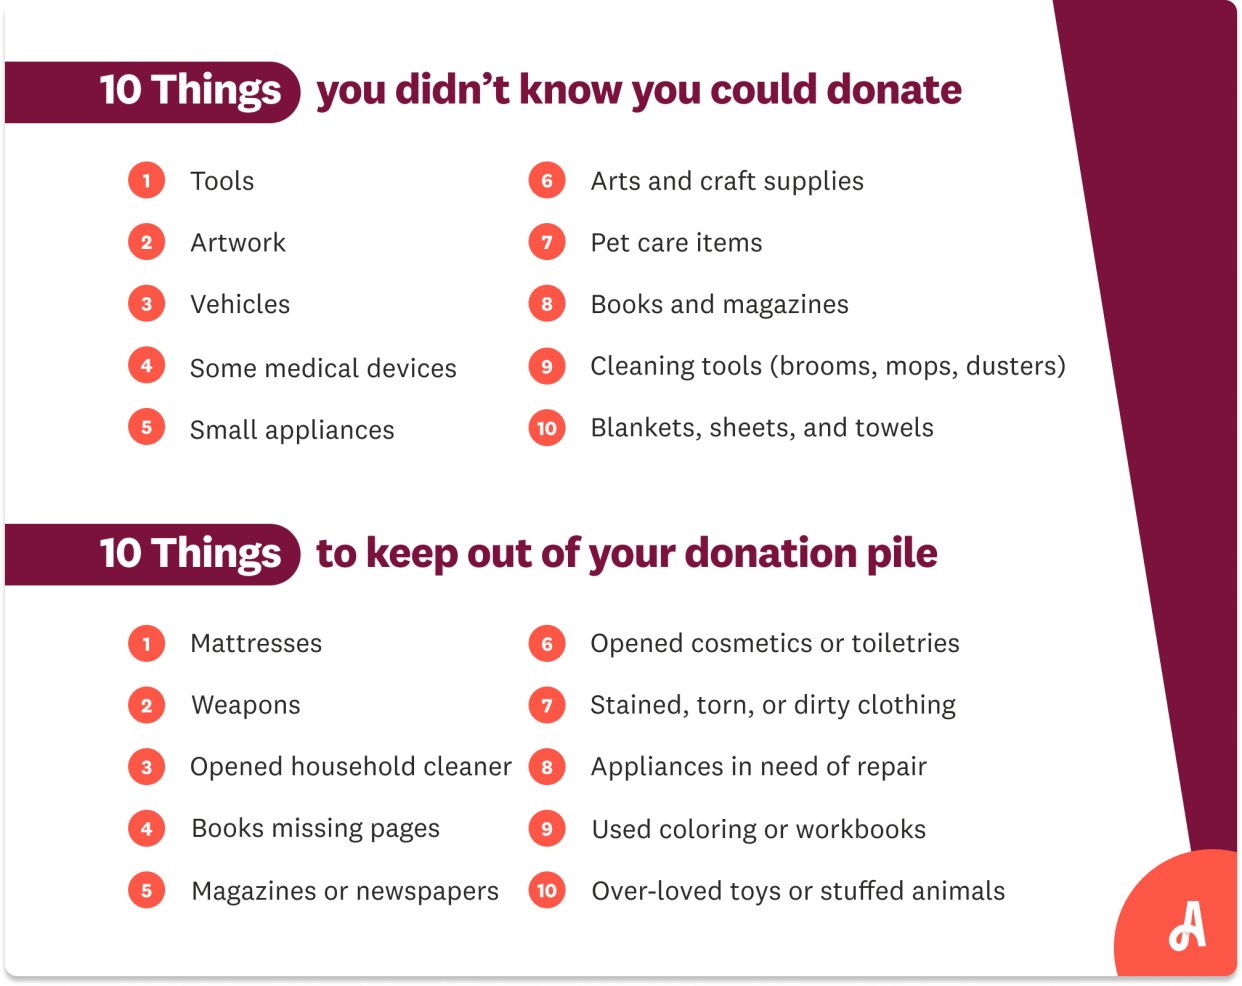 10 things you can donate, like vehicles, and 10 things you shouldn’t, including mattresses